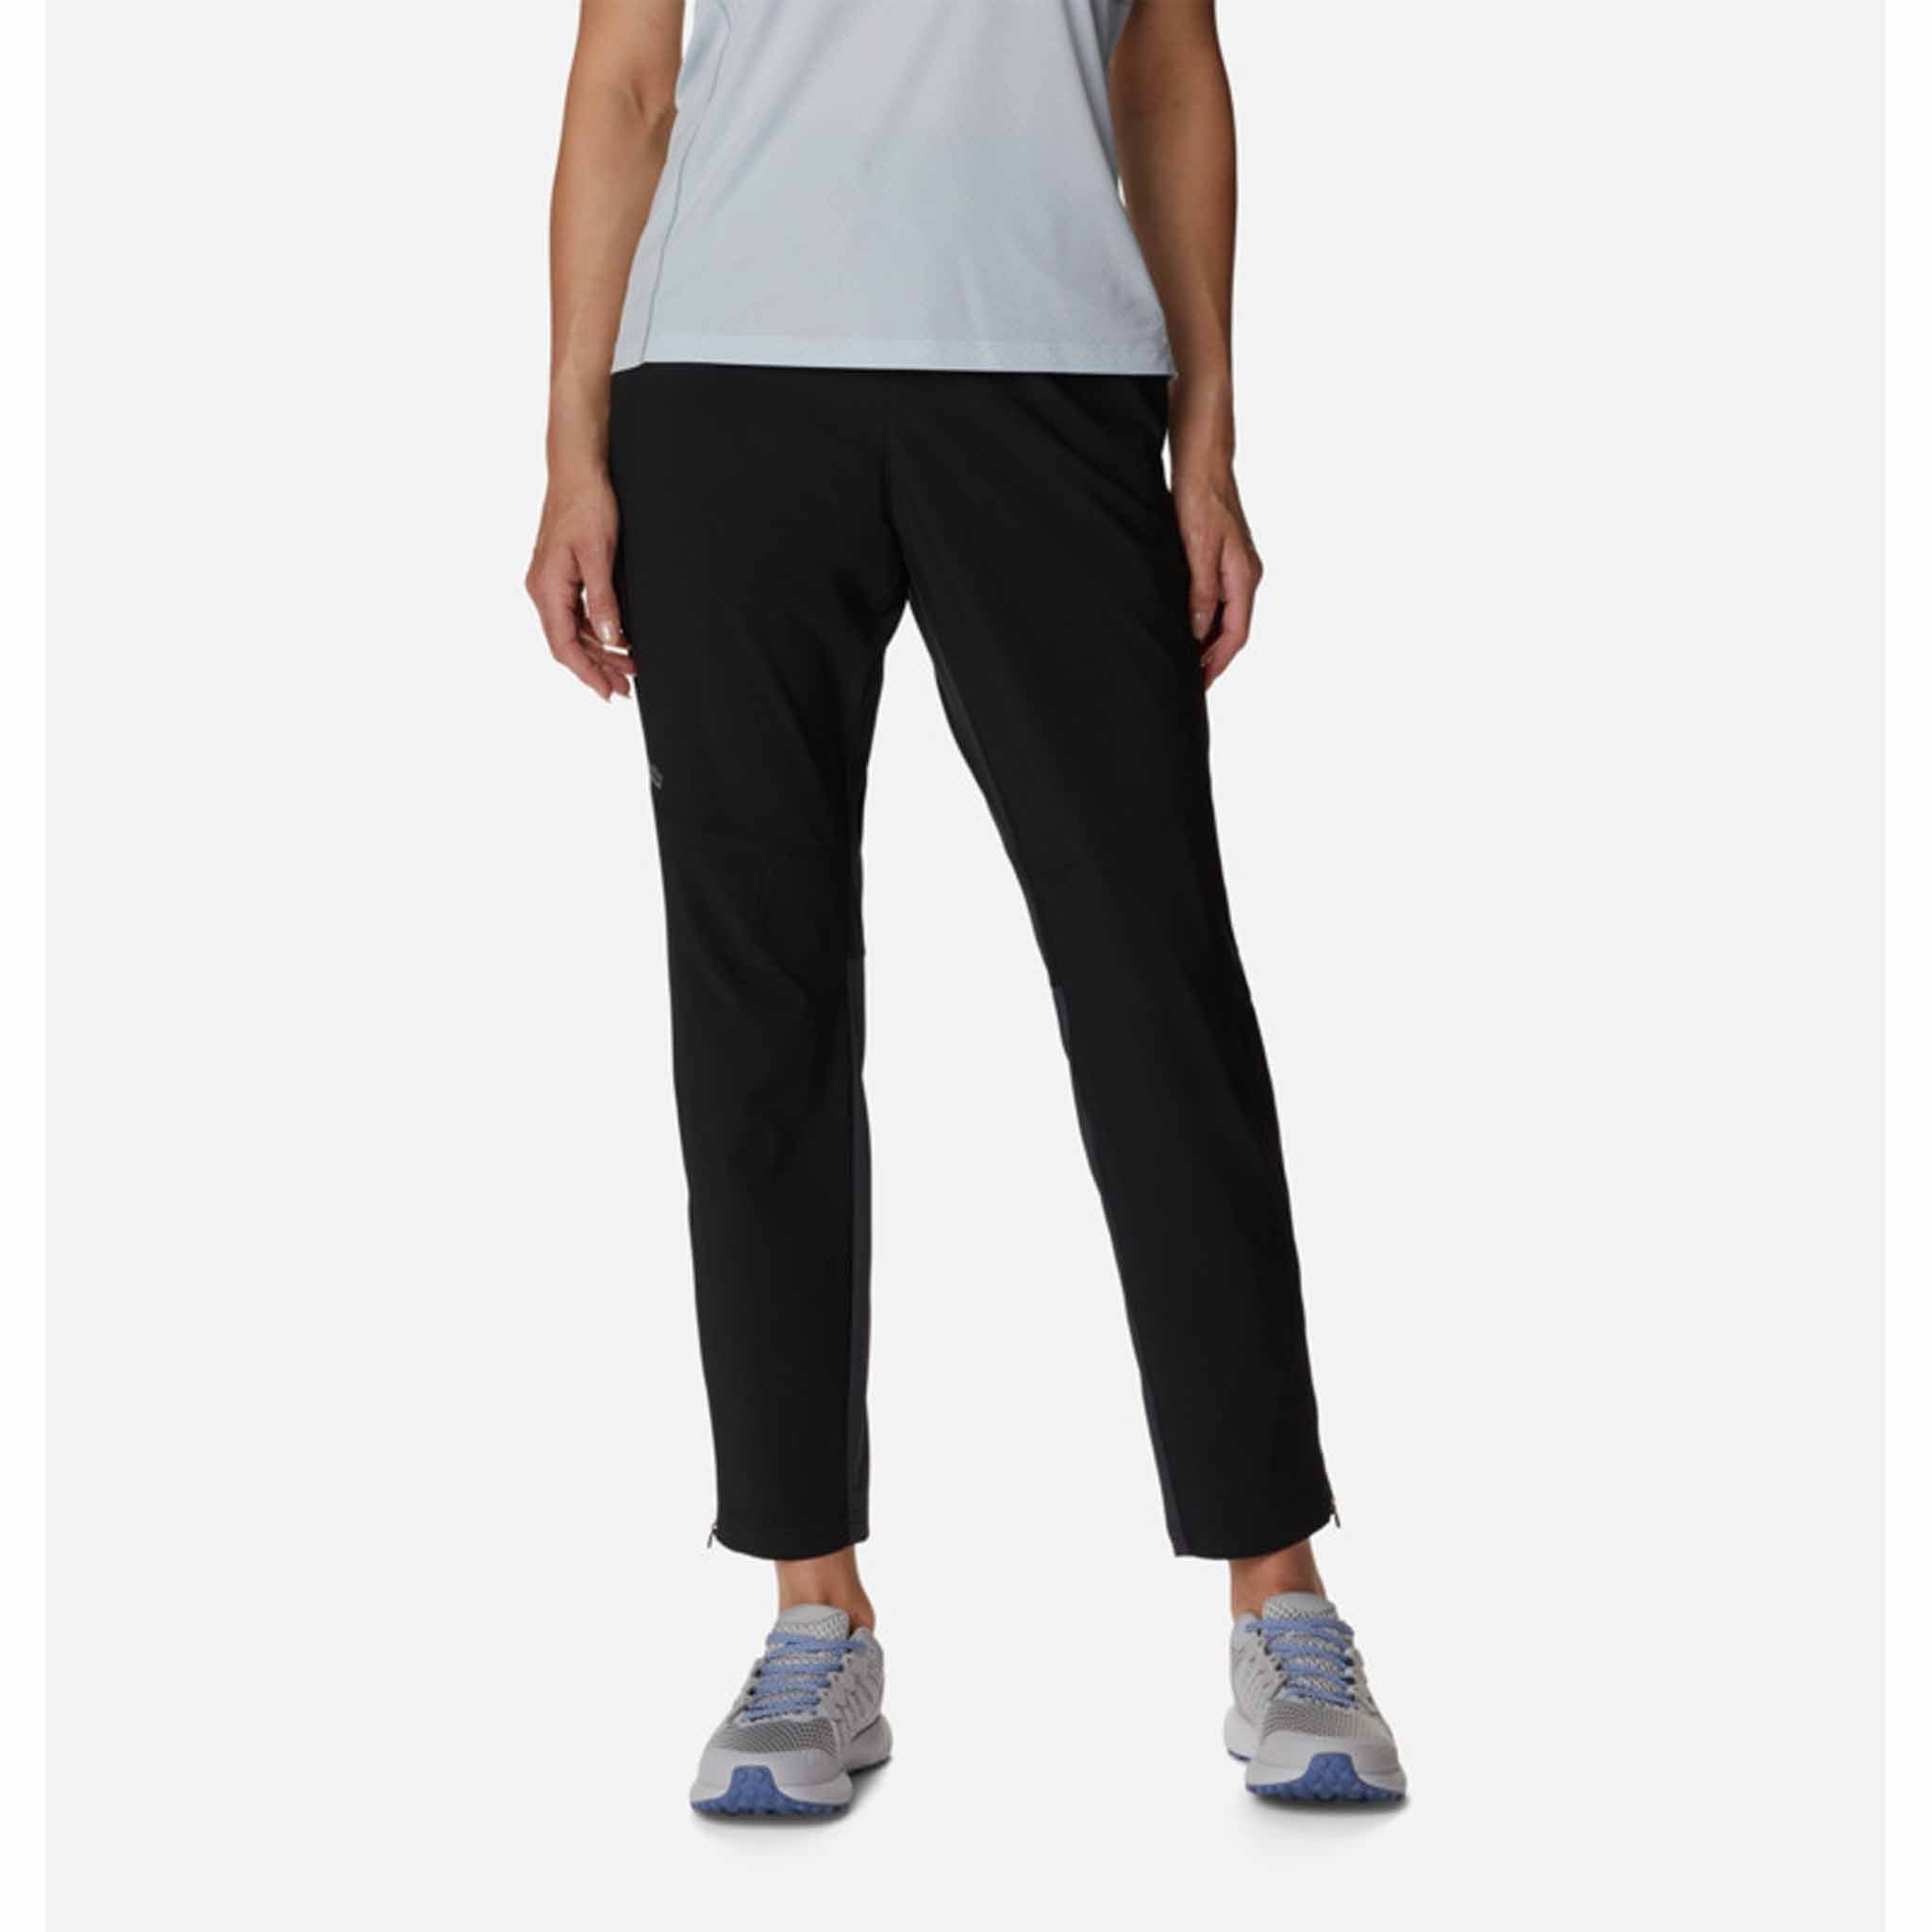 Columbia Endless Trail Training joggers for women - Soccer Sport Fitness